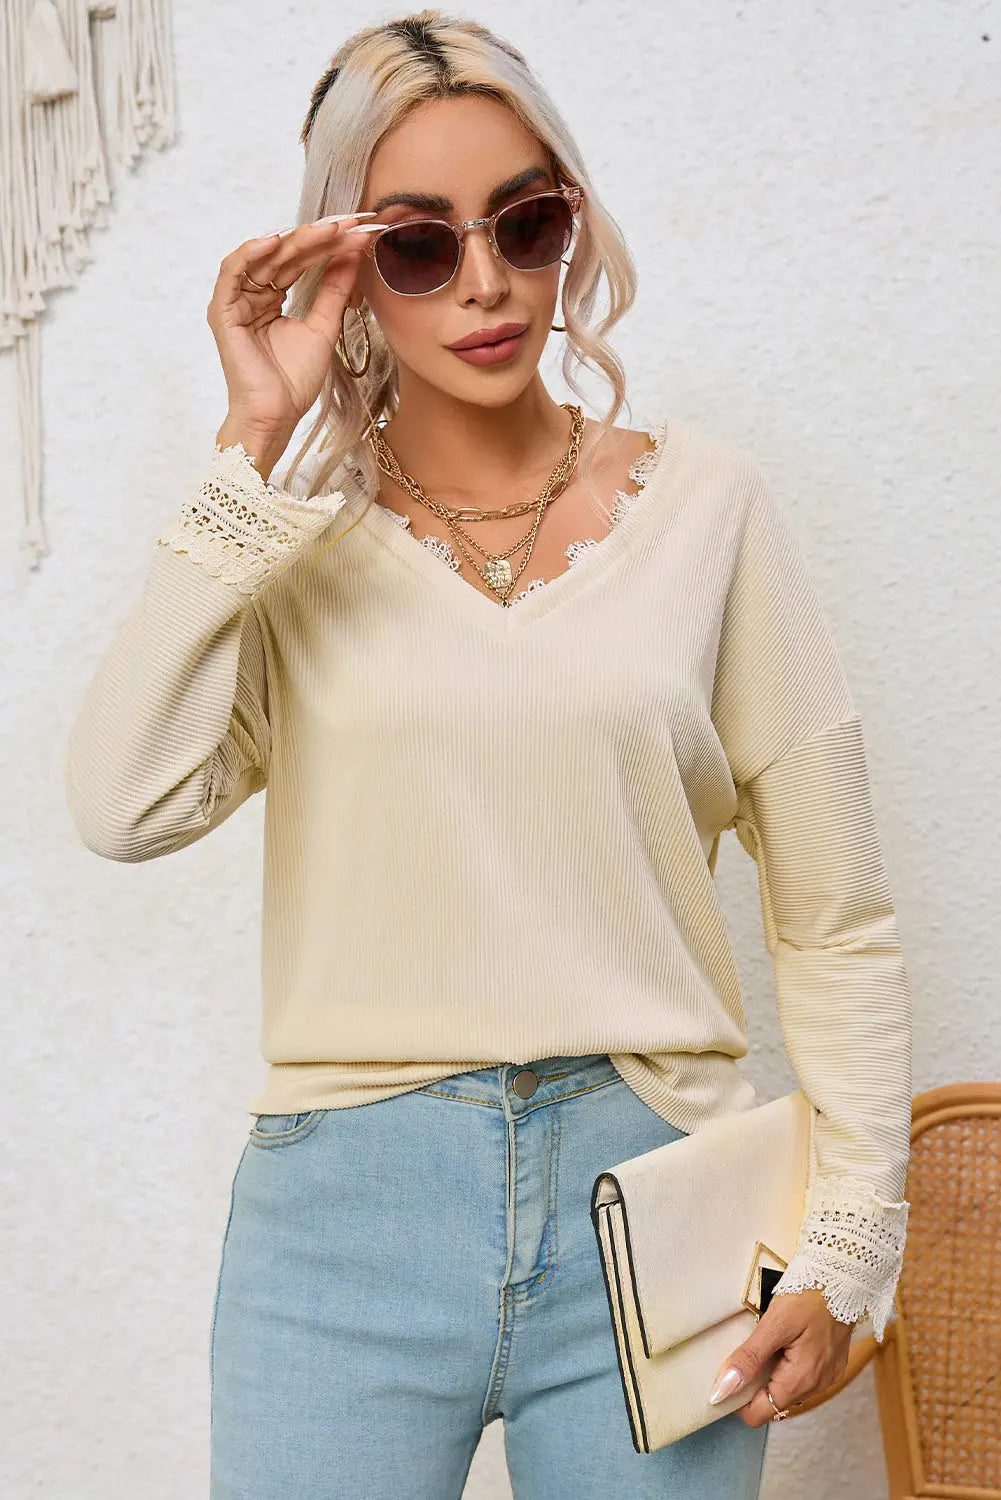 Apricot ribbed texture lace trim v neck long sleeve top - tops